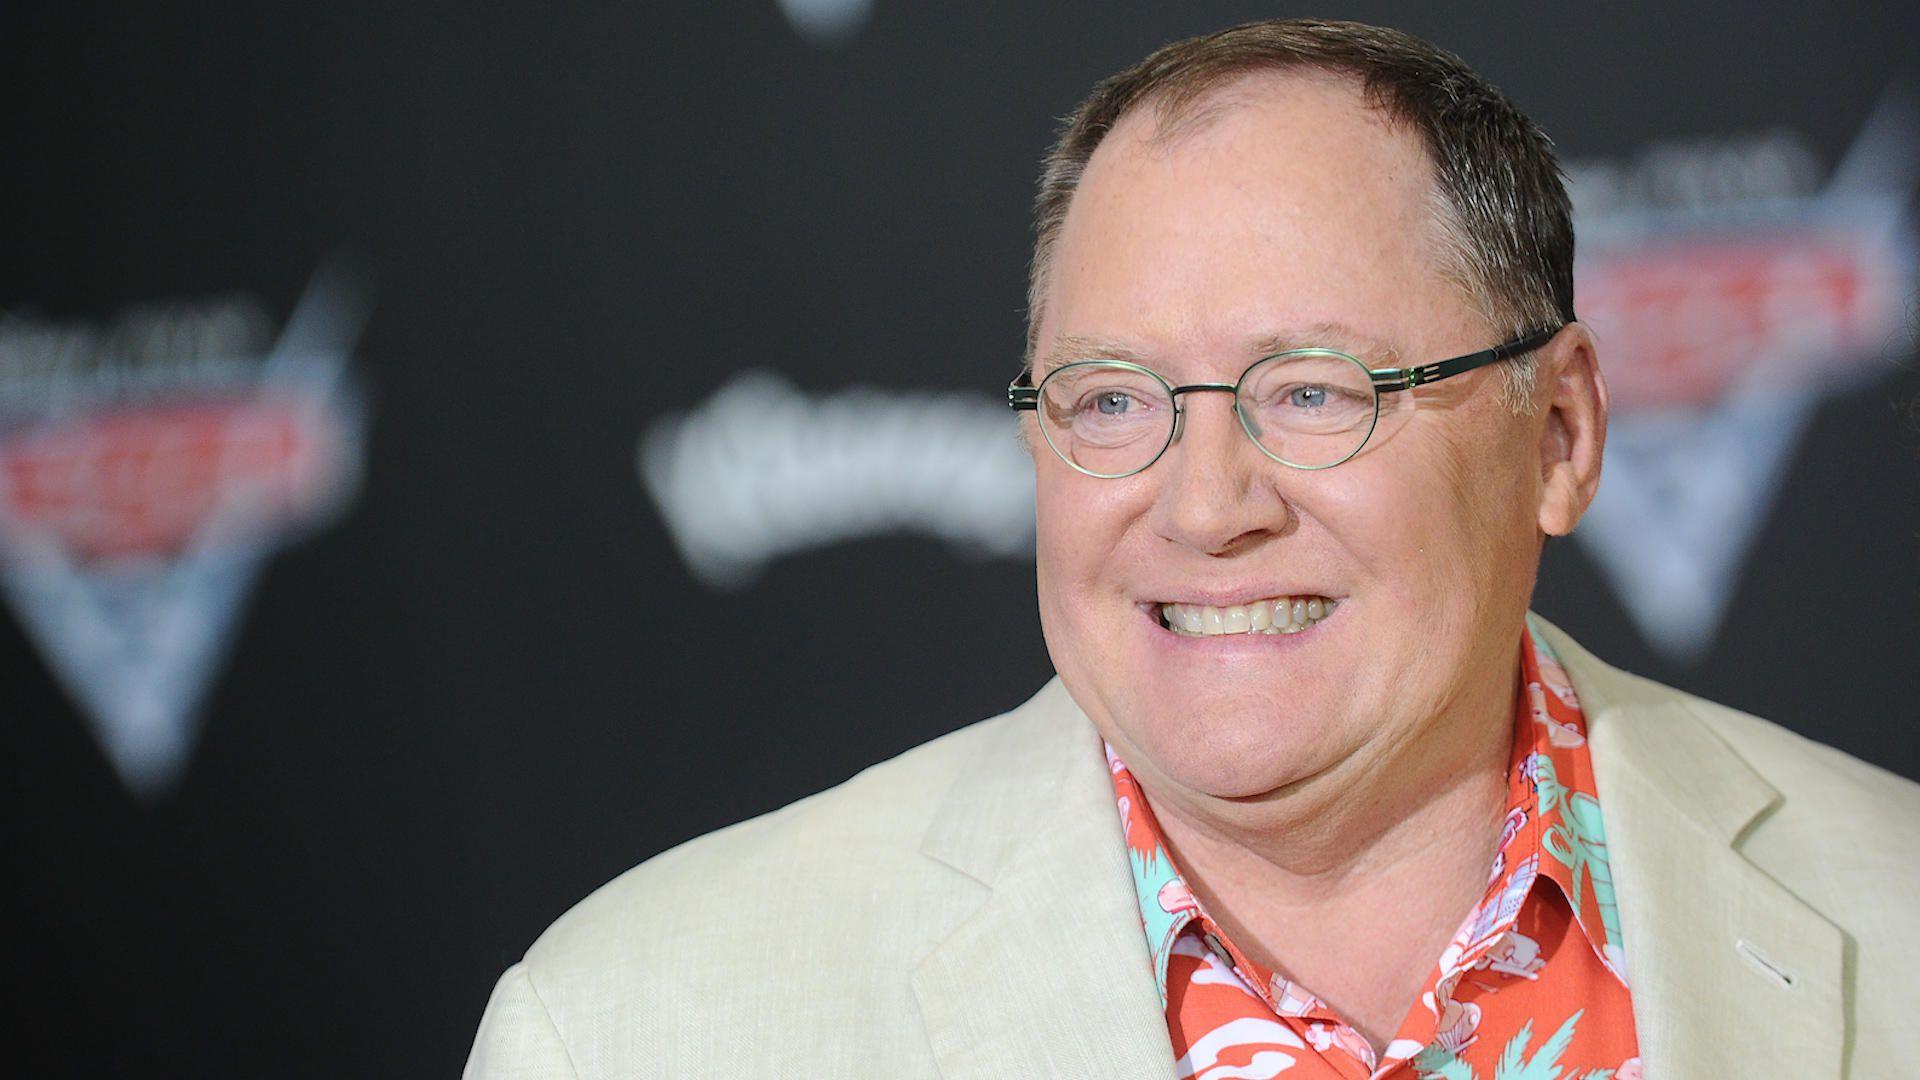 Pixar head Lasseter out (for now) amid misconduct reports